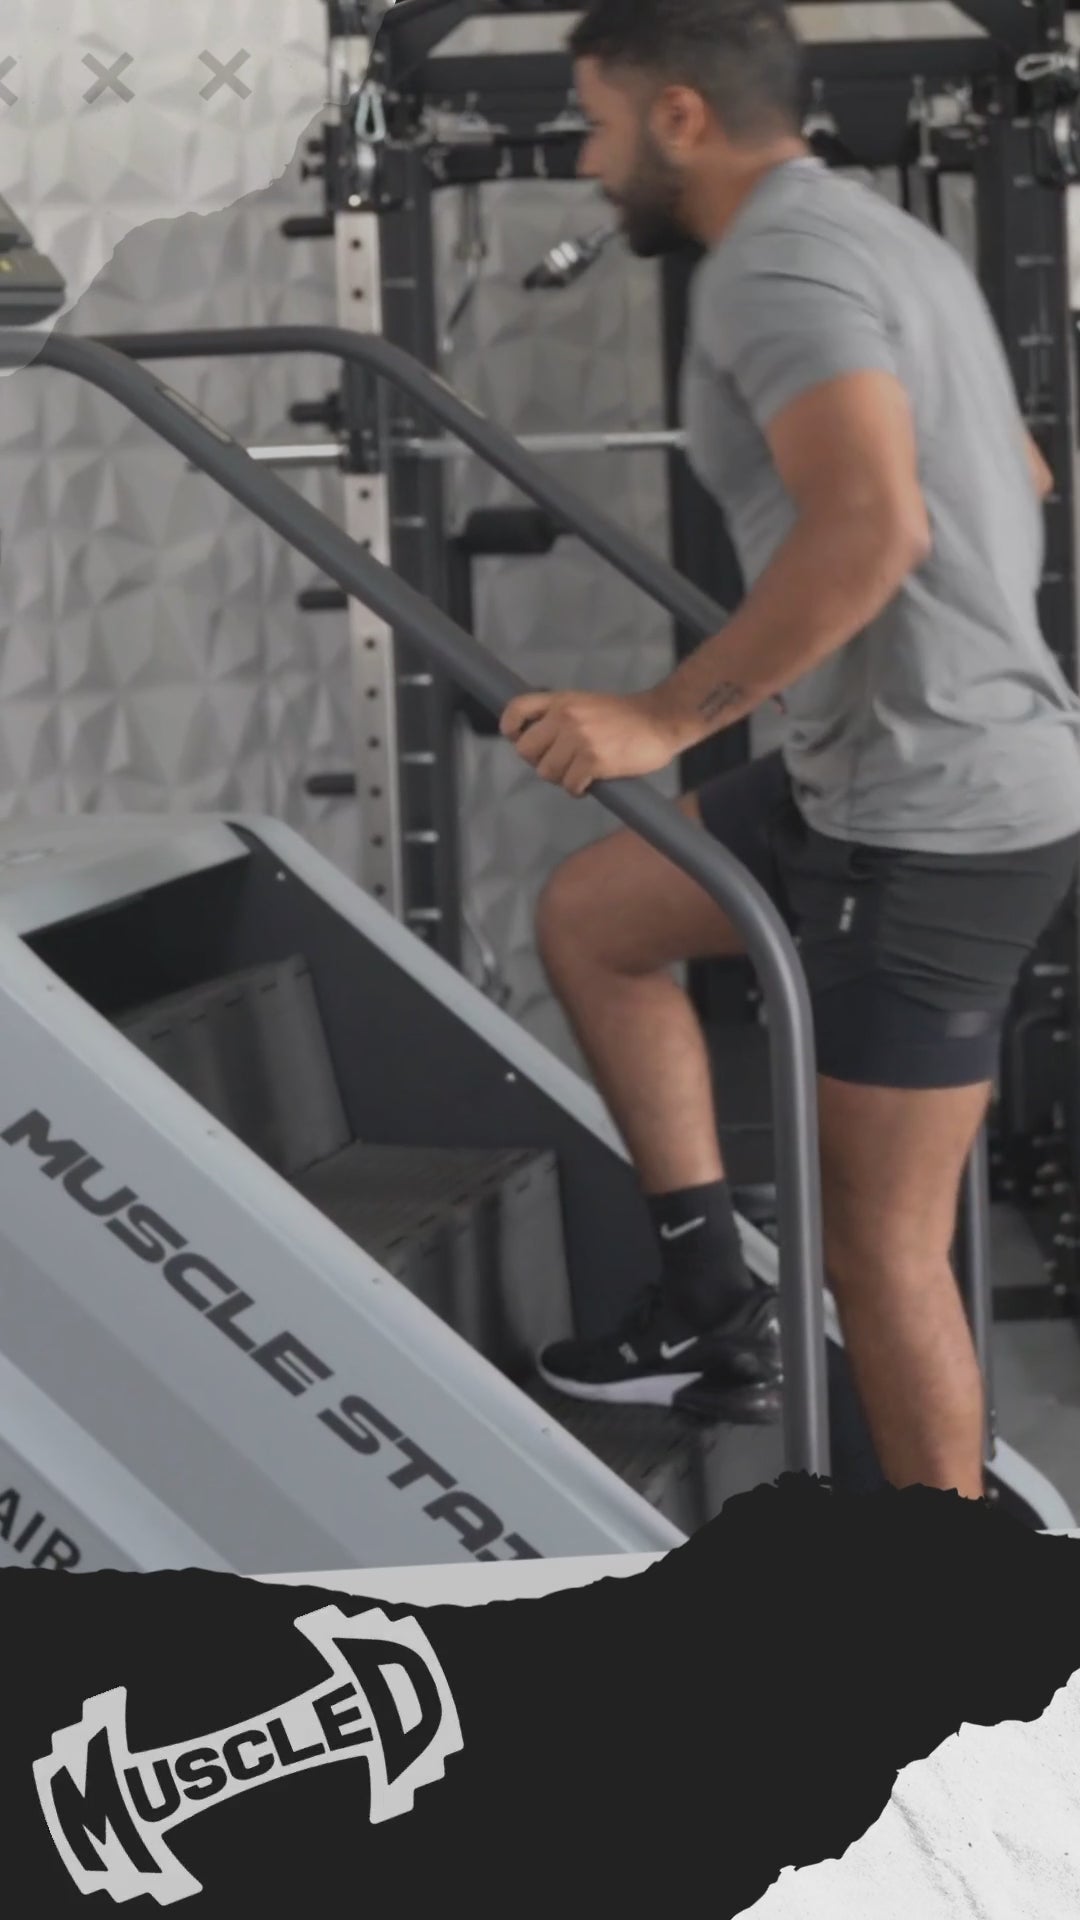 Commercial Stair Climber - LED Screen video